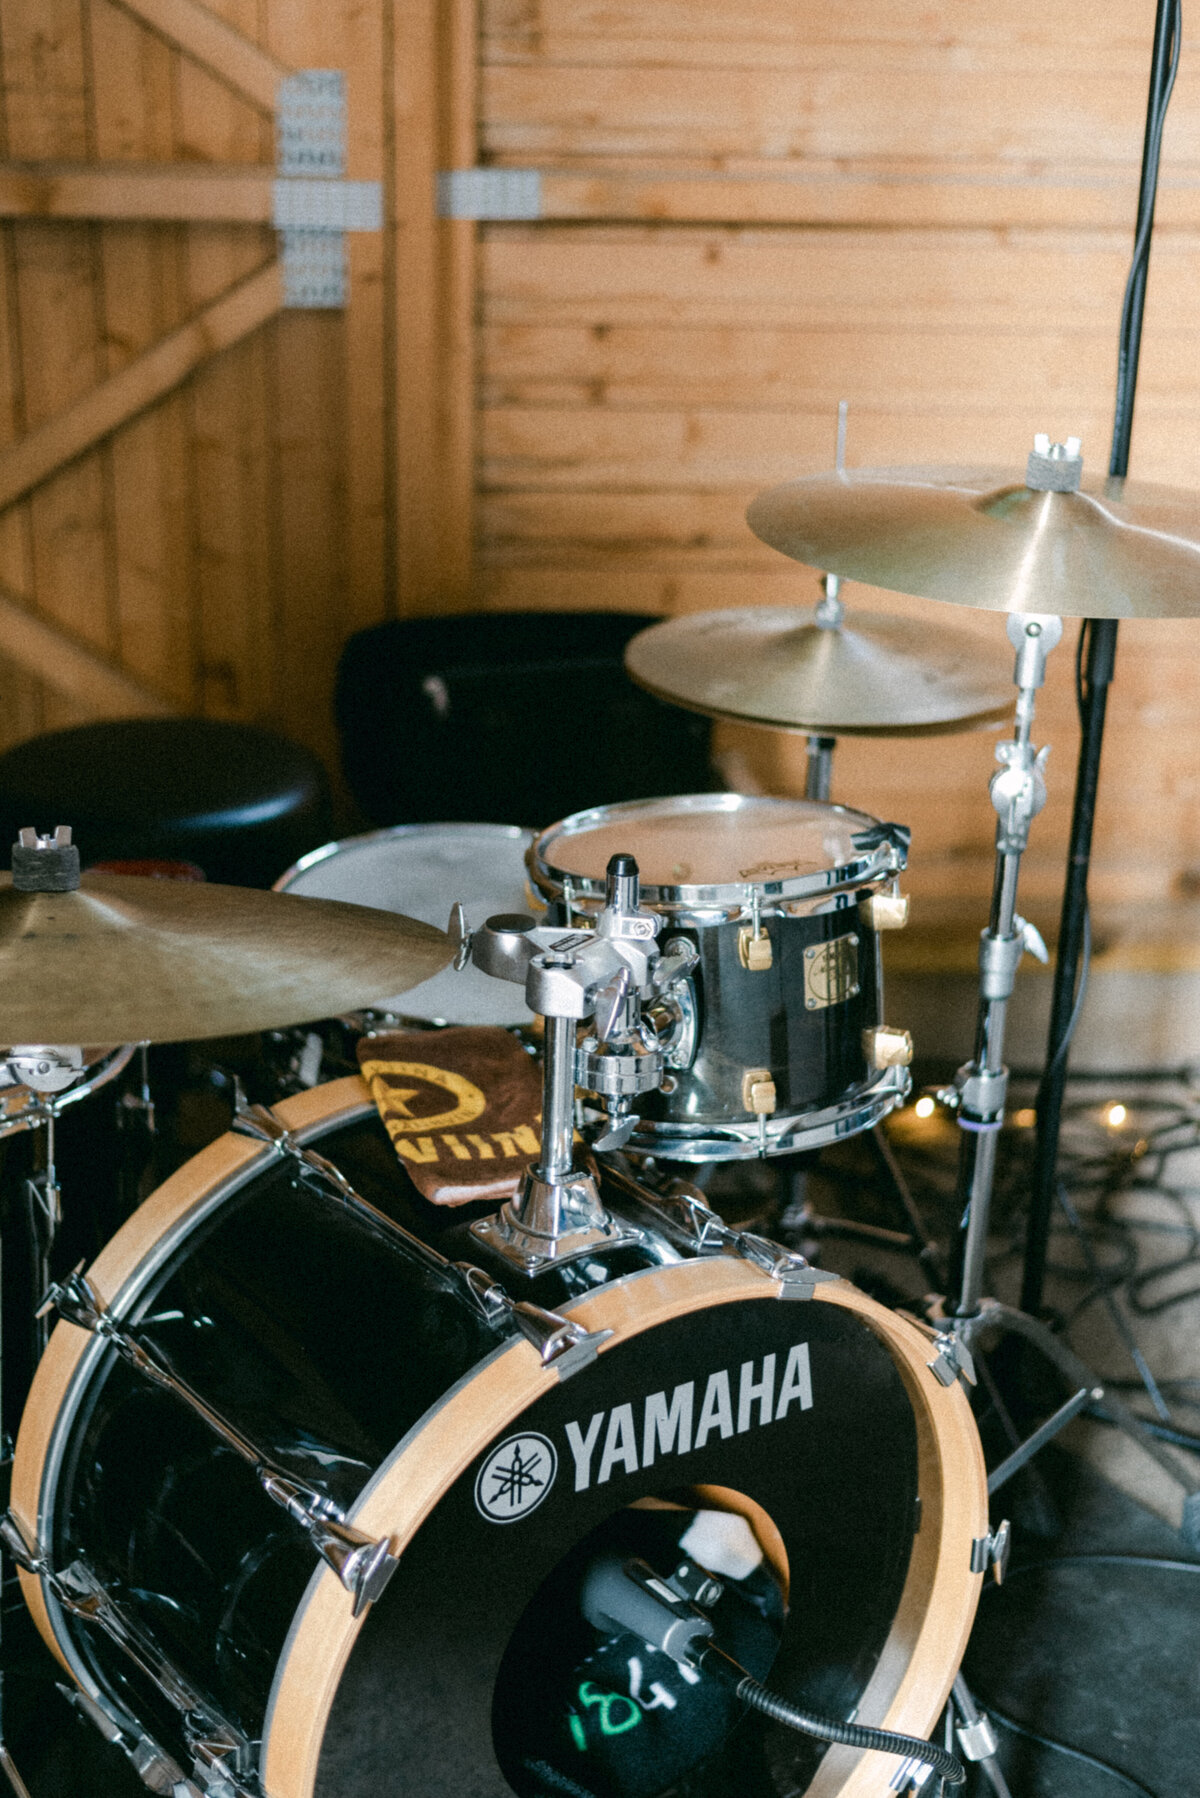 A drumset photographed by wedding photographer Hannika Gabrielsson.